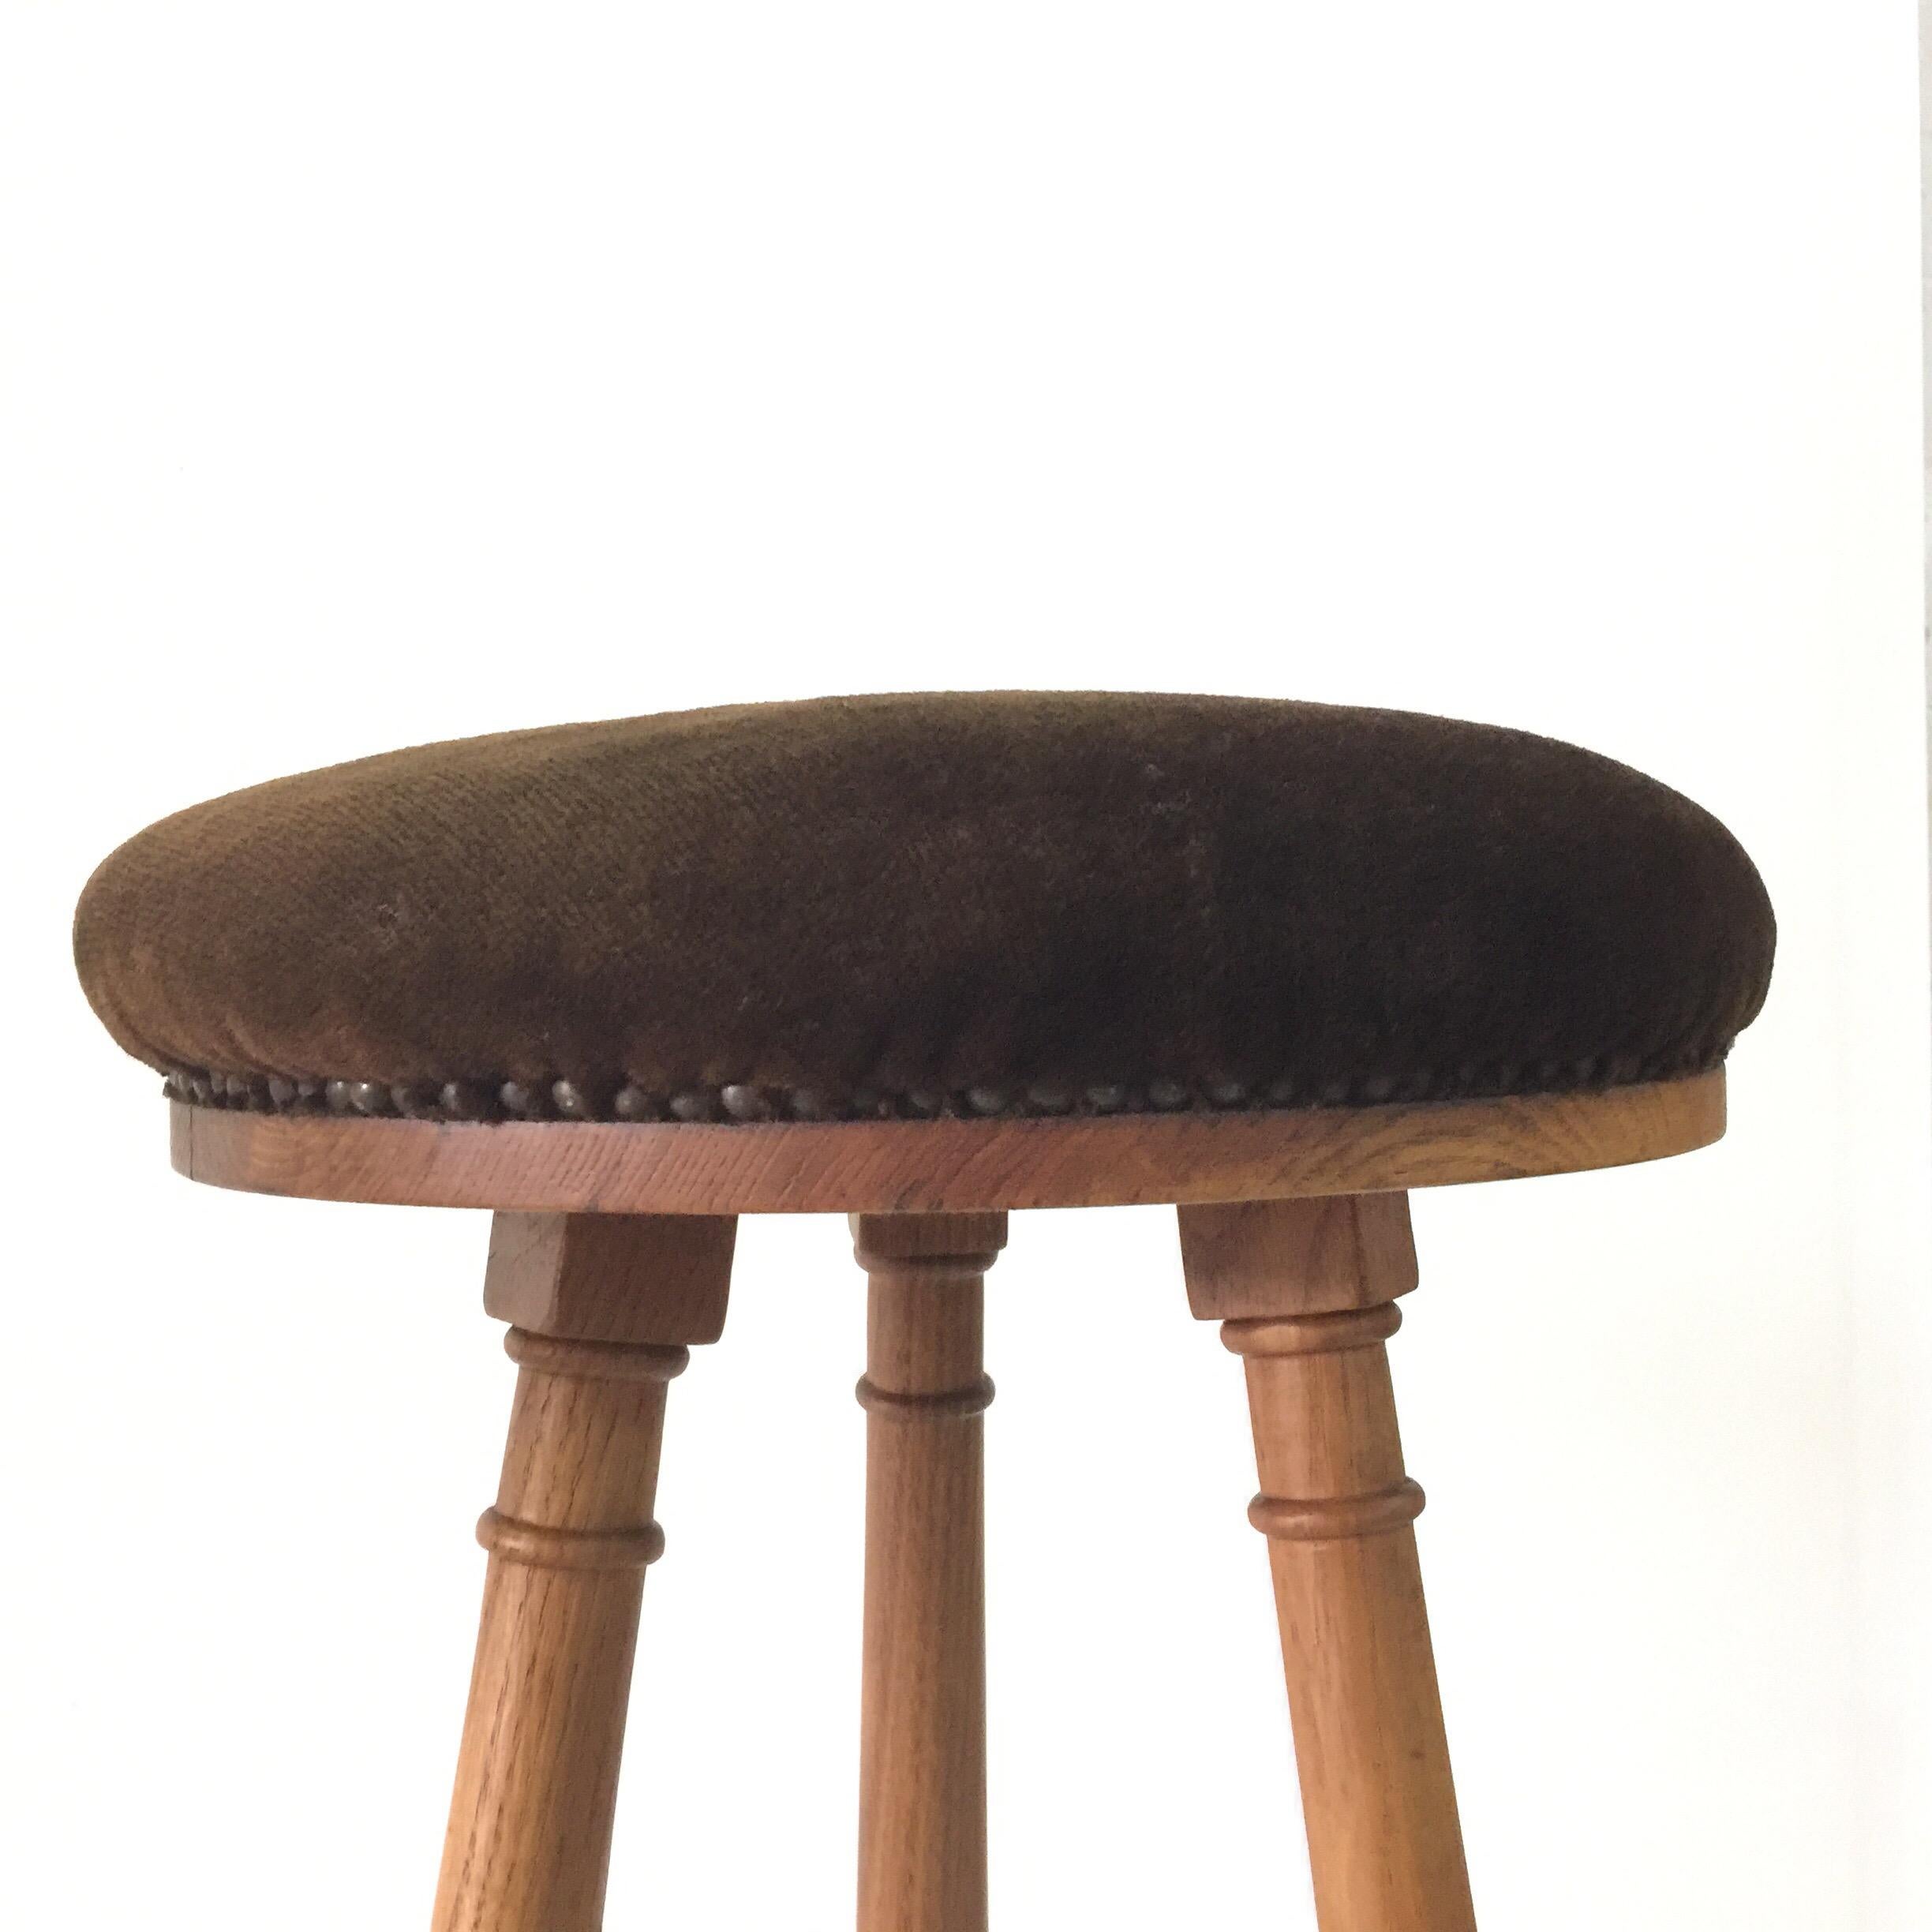 Mid-20th Century Pair of French Oak Bar Stools, Attributed to Jacques Adnet